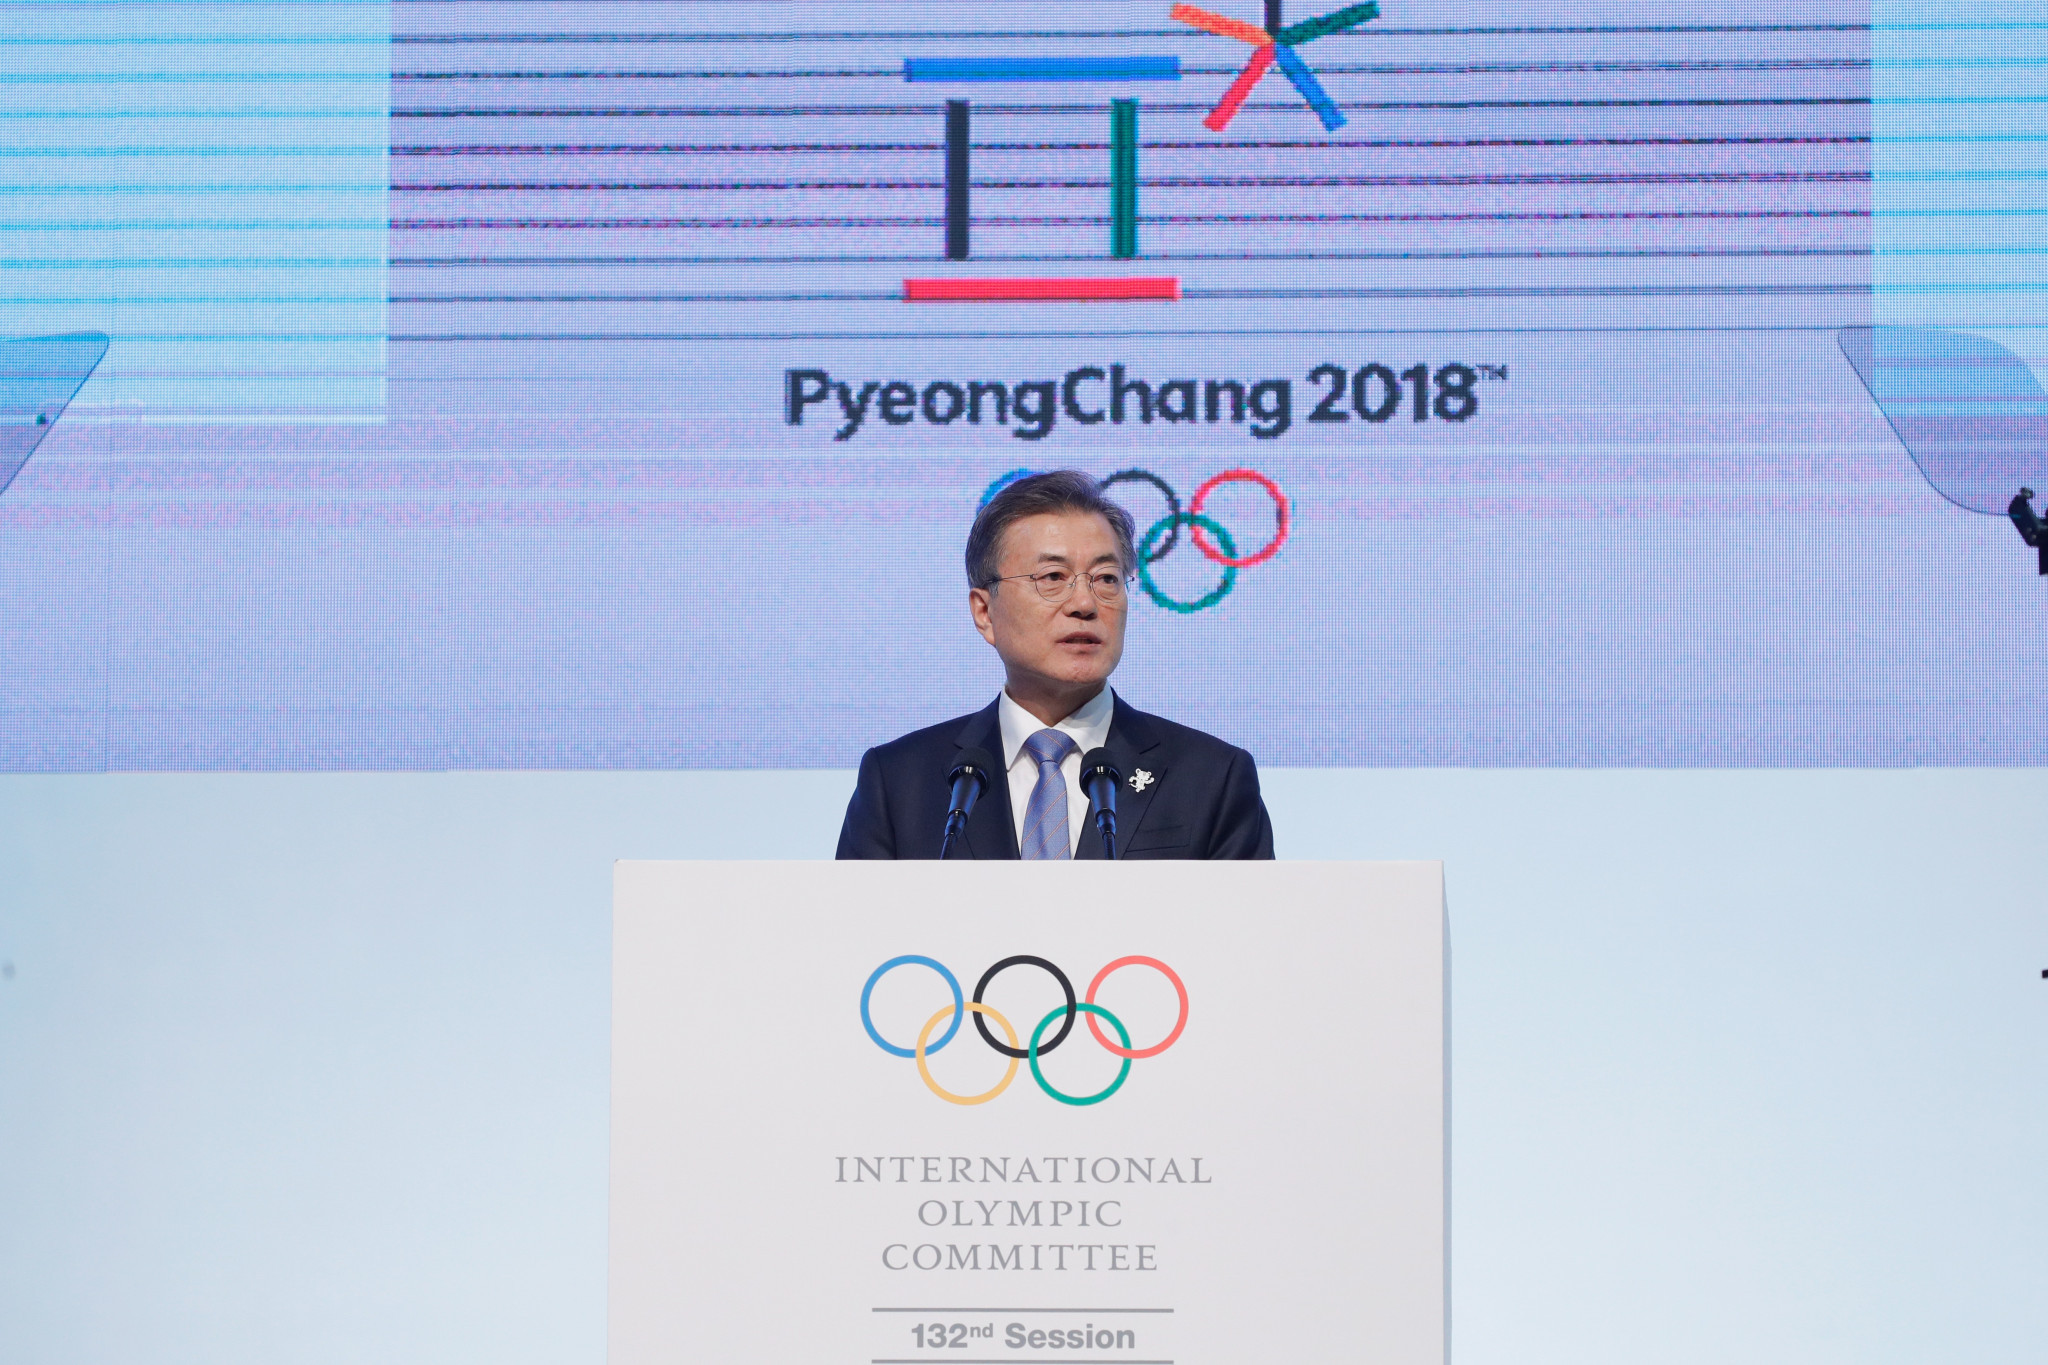 Moon Jae-In is uniquely positioned to use Pyeongchang 2018 and take up human rights as a central platform of his administration, according to Brad Adams, Asia director at Human Rights Watch ©Getty Images